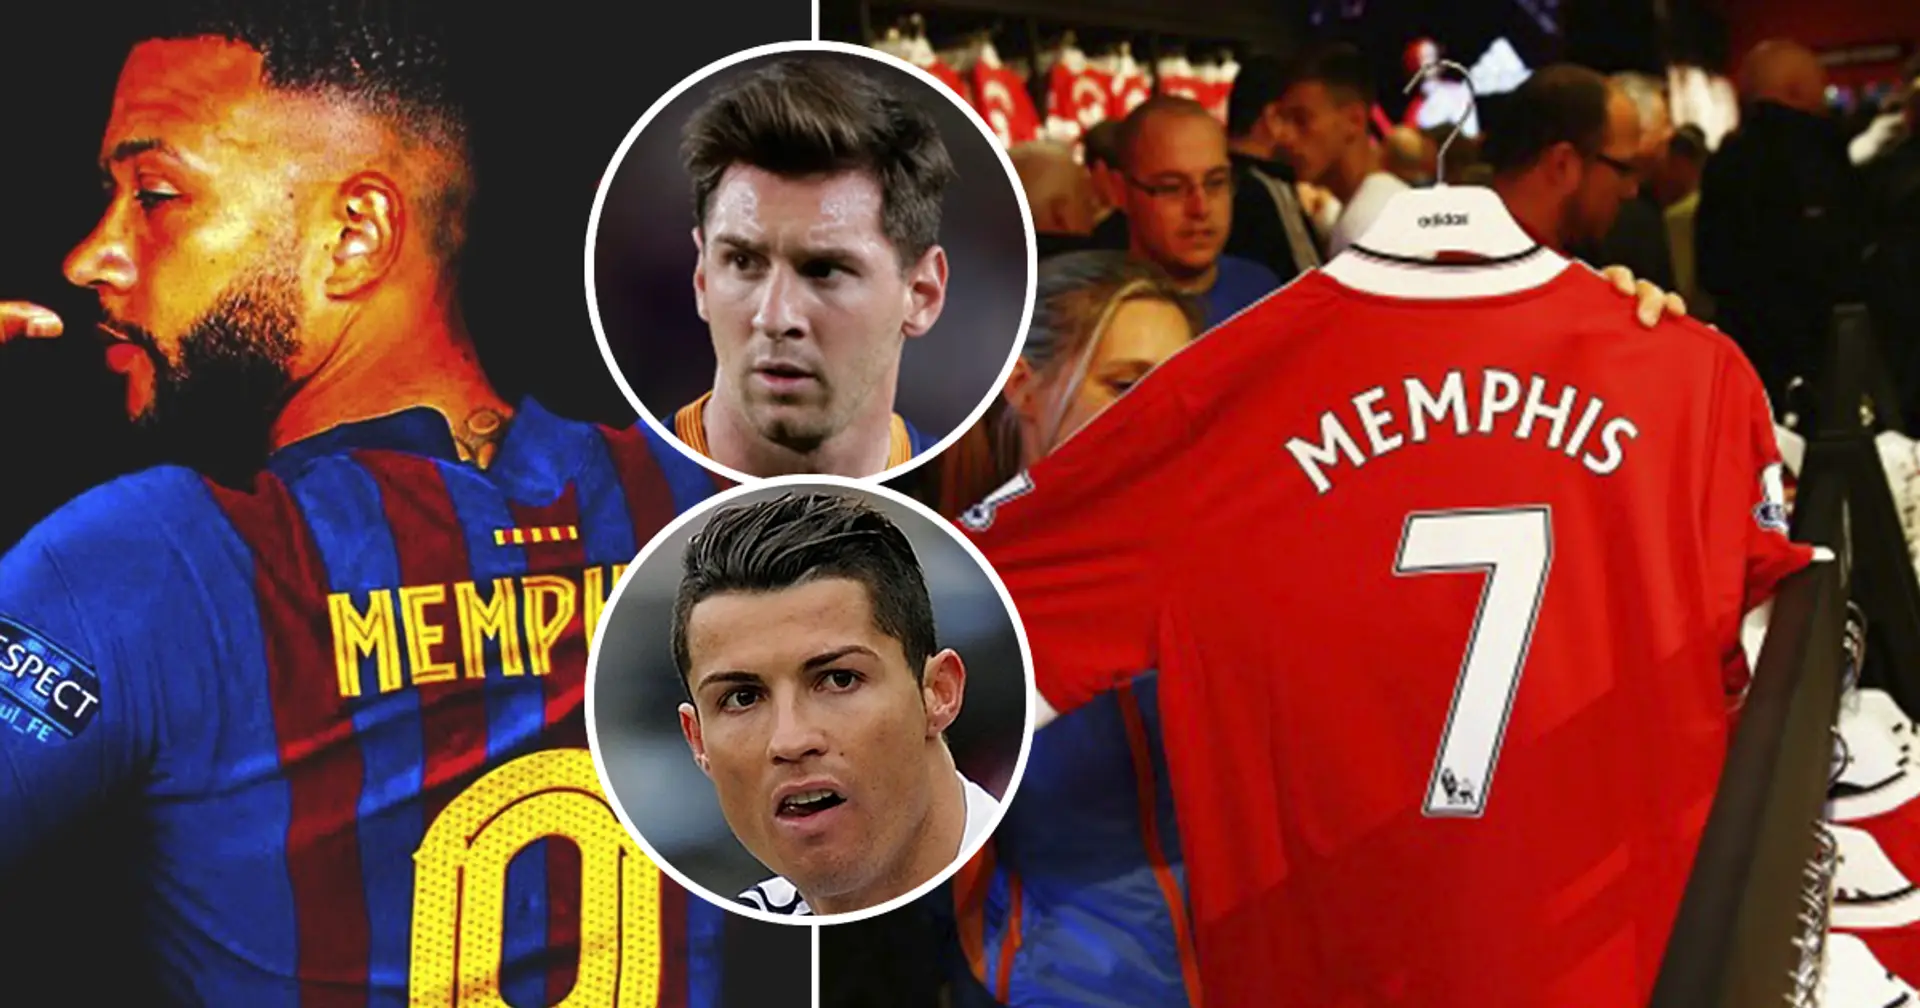 How Depay reached Messi and Ronaldo in shirt sales